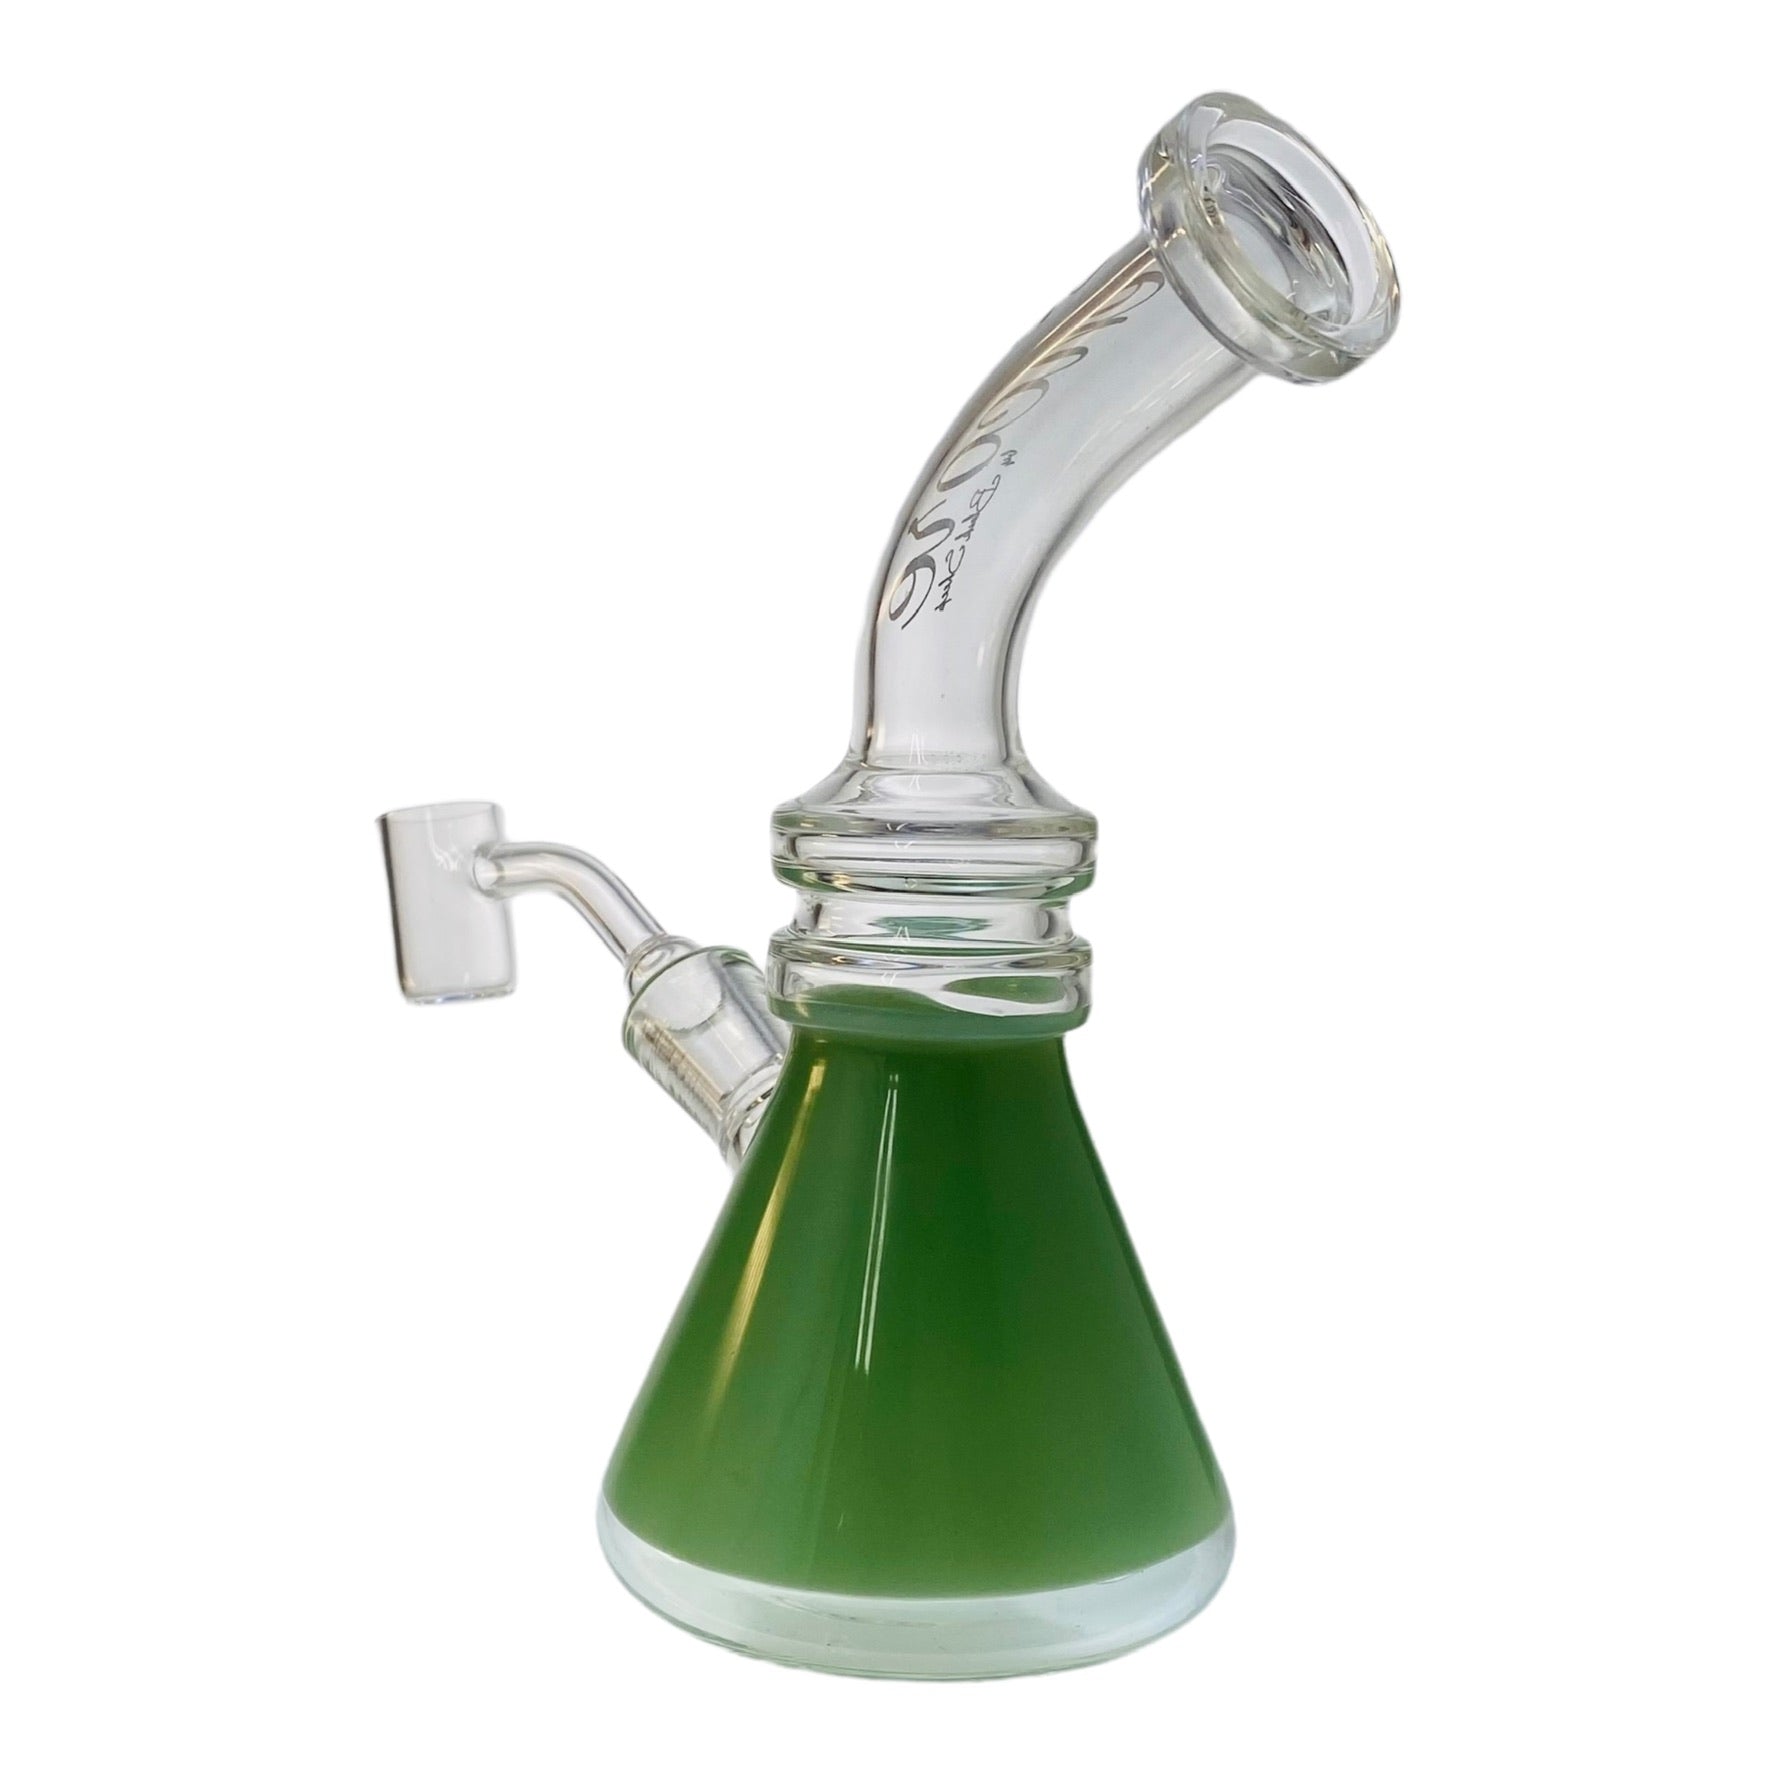 Encore Glass Beaker Base Dab Rig With Kick Back Bent Mouthpiece - Teal best cheap cute Encore Glass Beaker Base Dab Rig Bent Mouthpiece And Teal Base